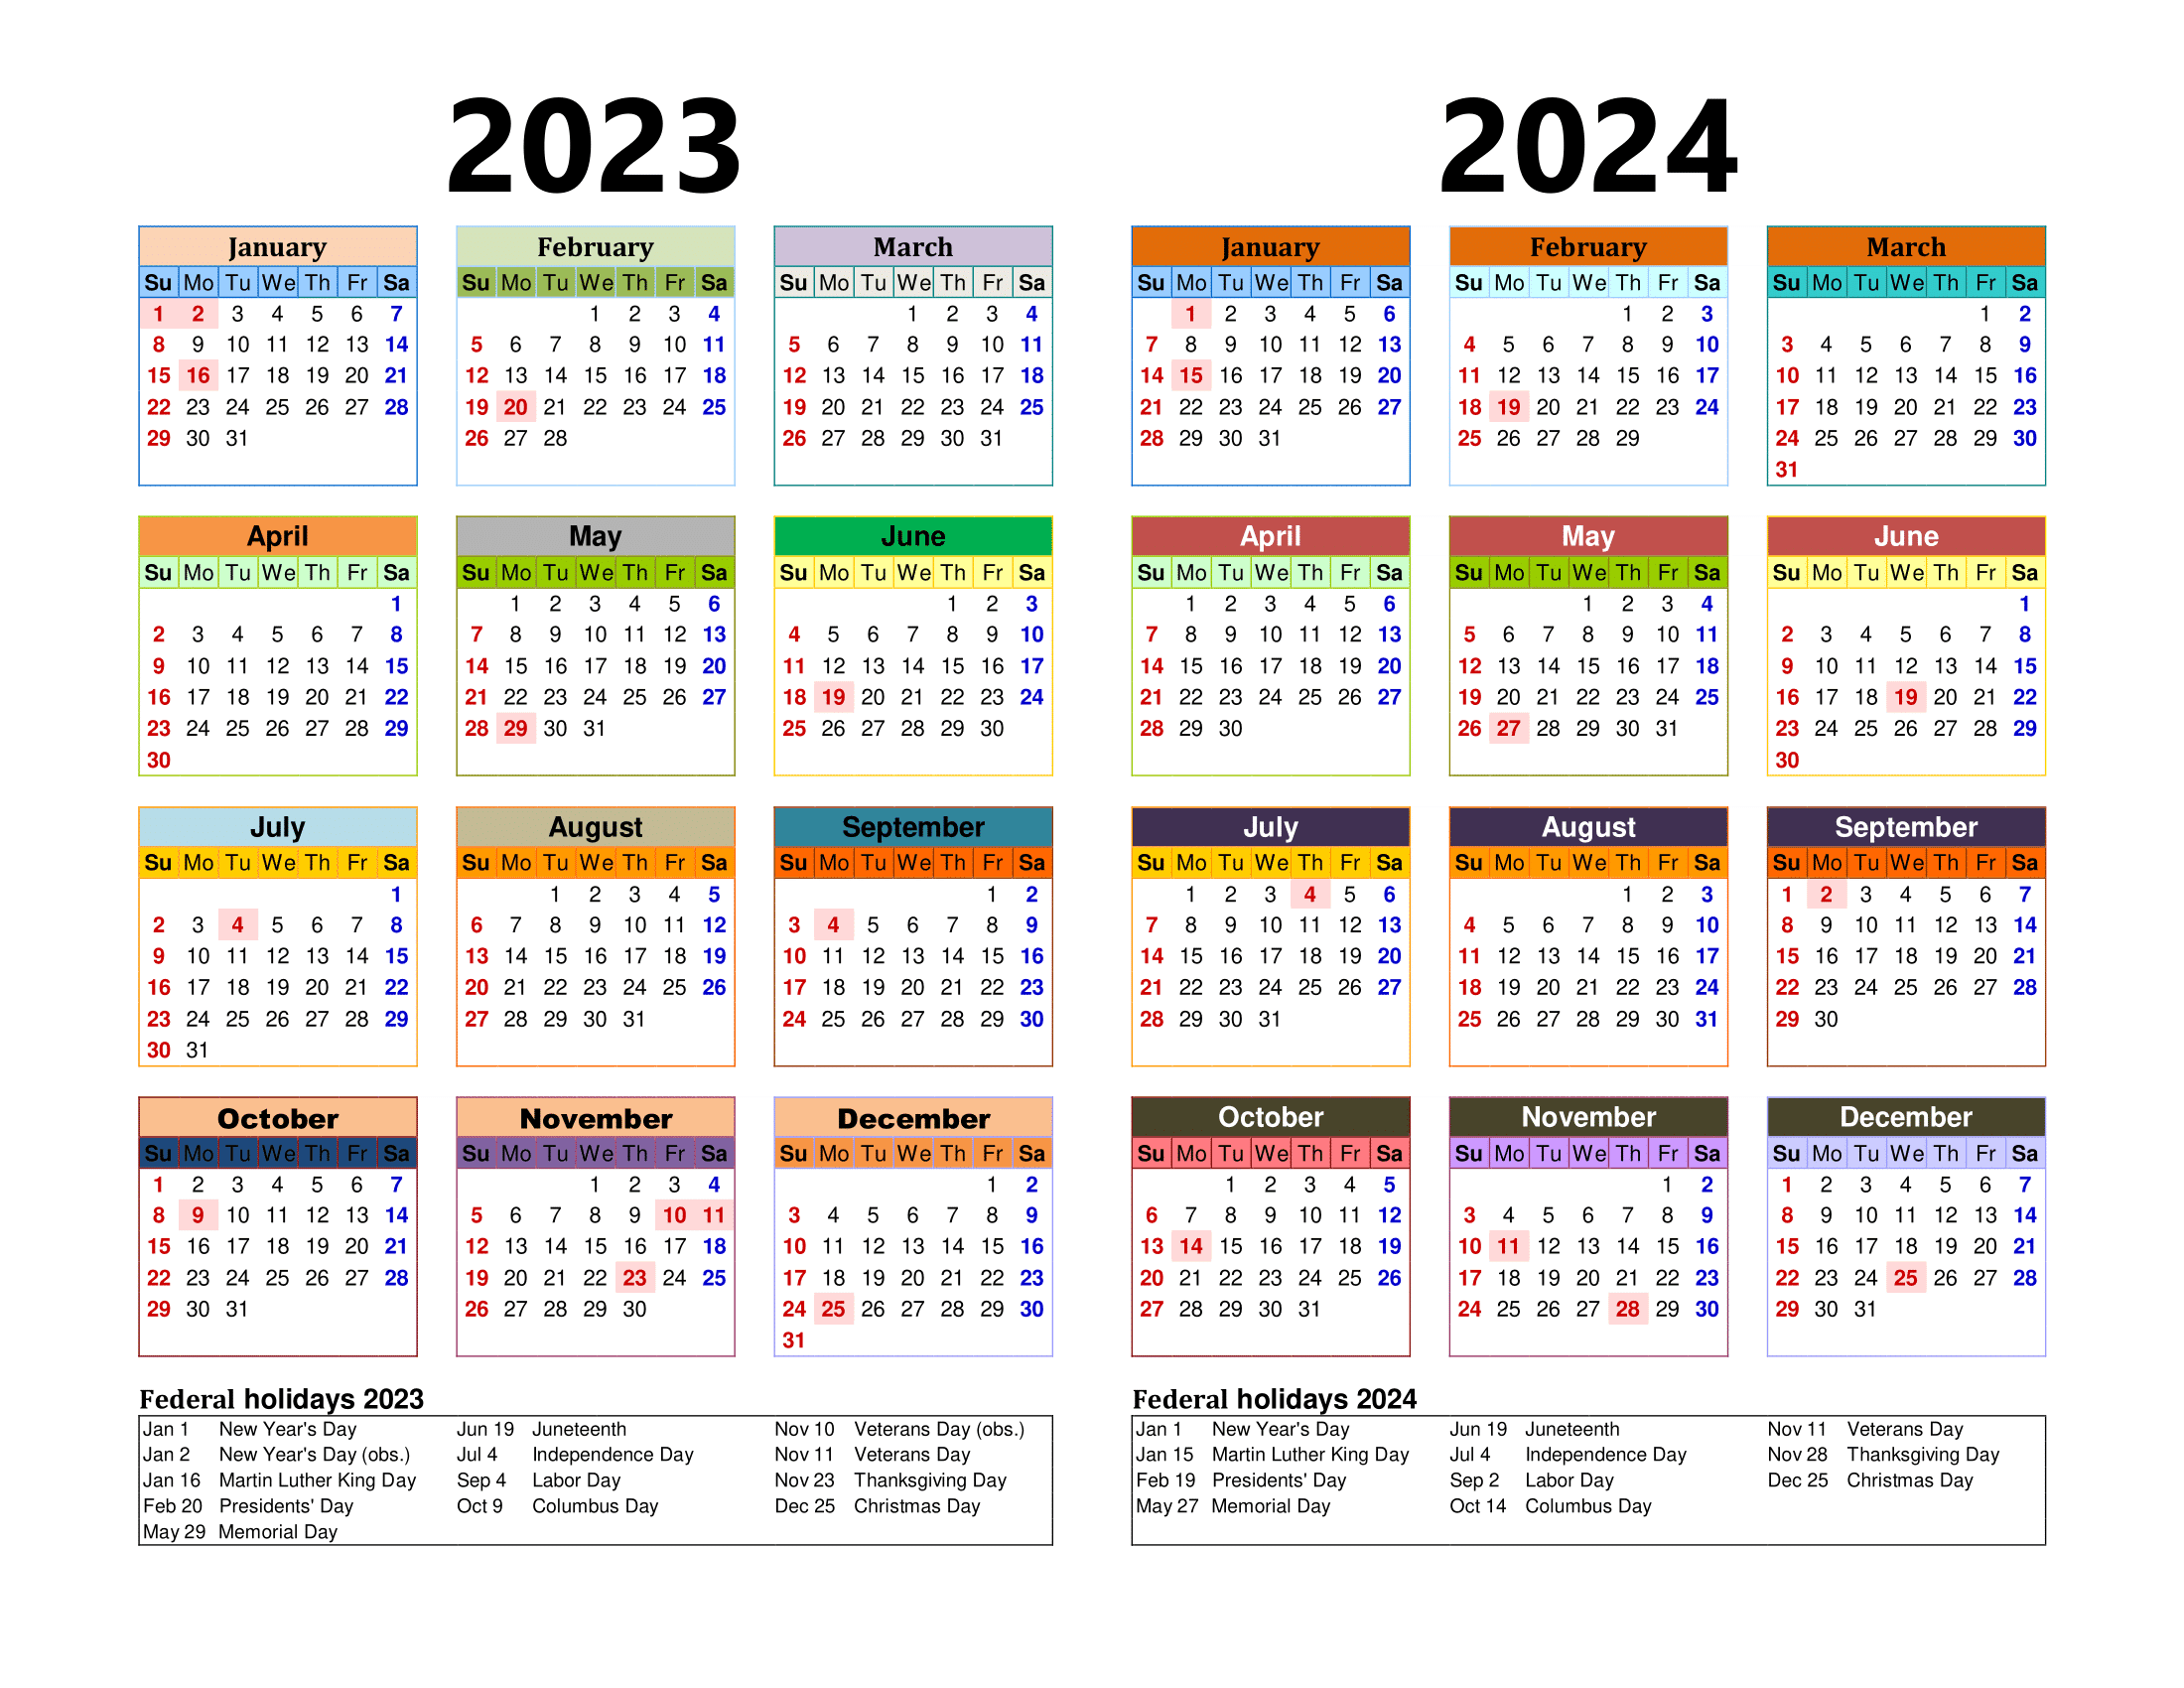 Free Printable Two Year Calendar Templates For 2023 And 2024 In Pdf for Printable 2023 And 2024 Calendar